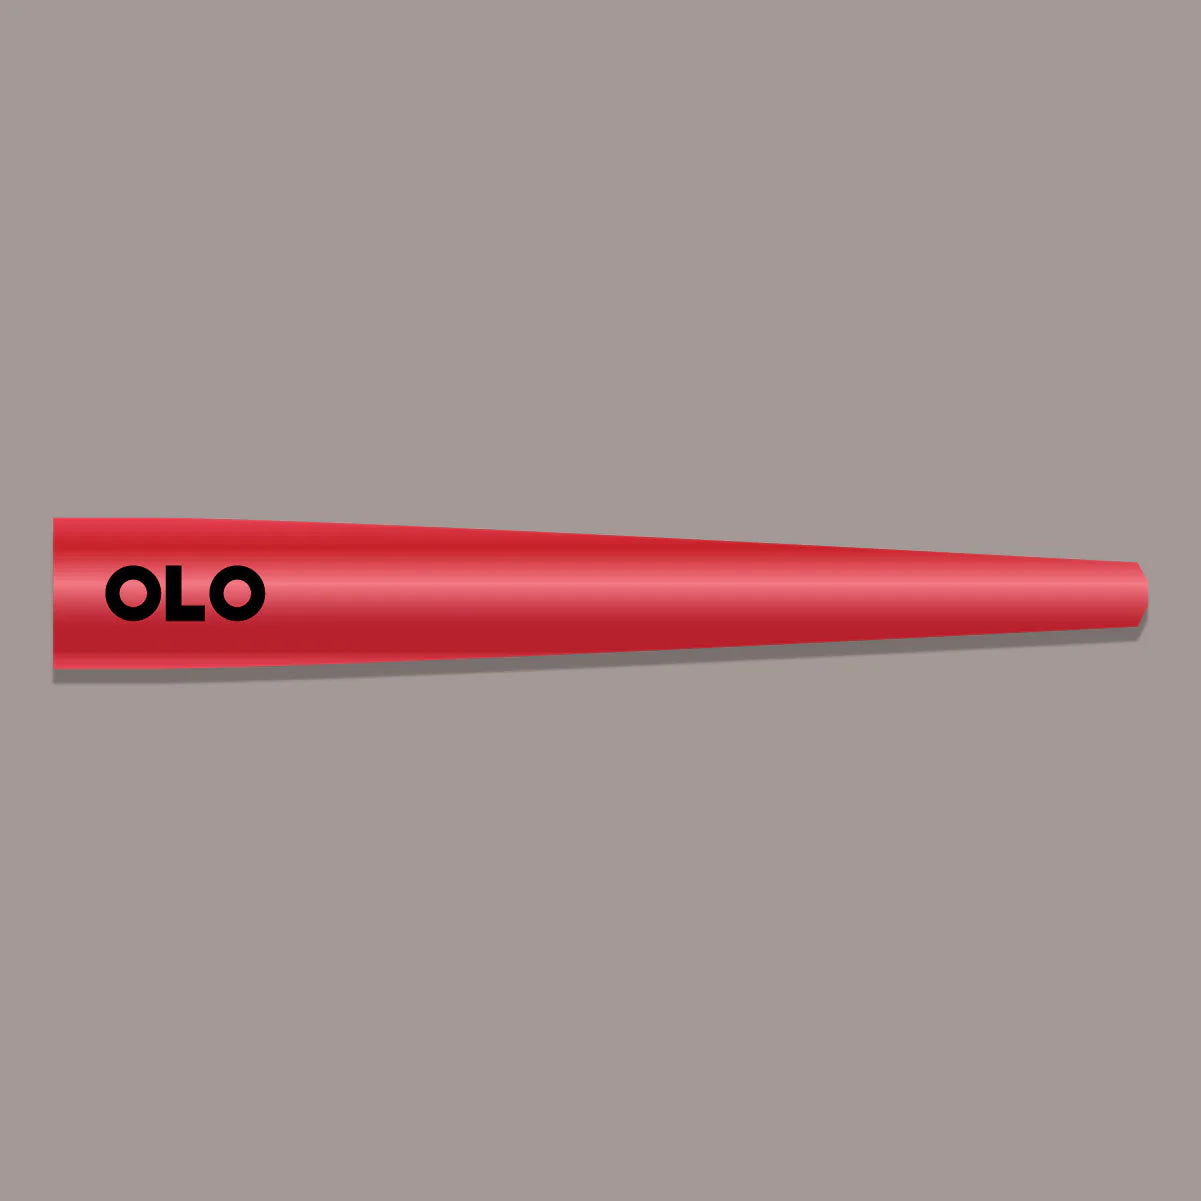 OLO Brush Handle - Red, 2 Pack